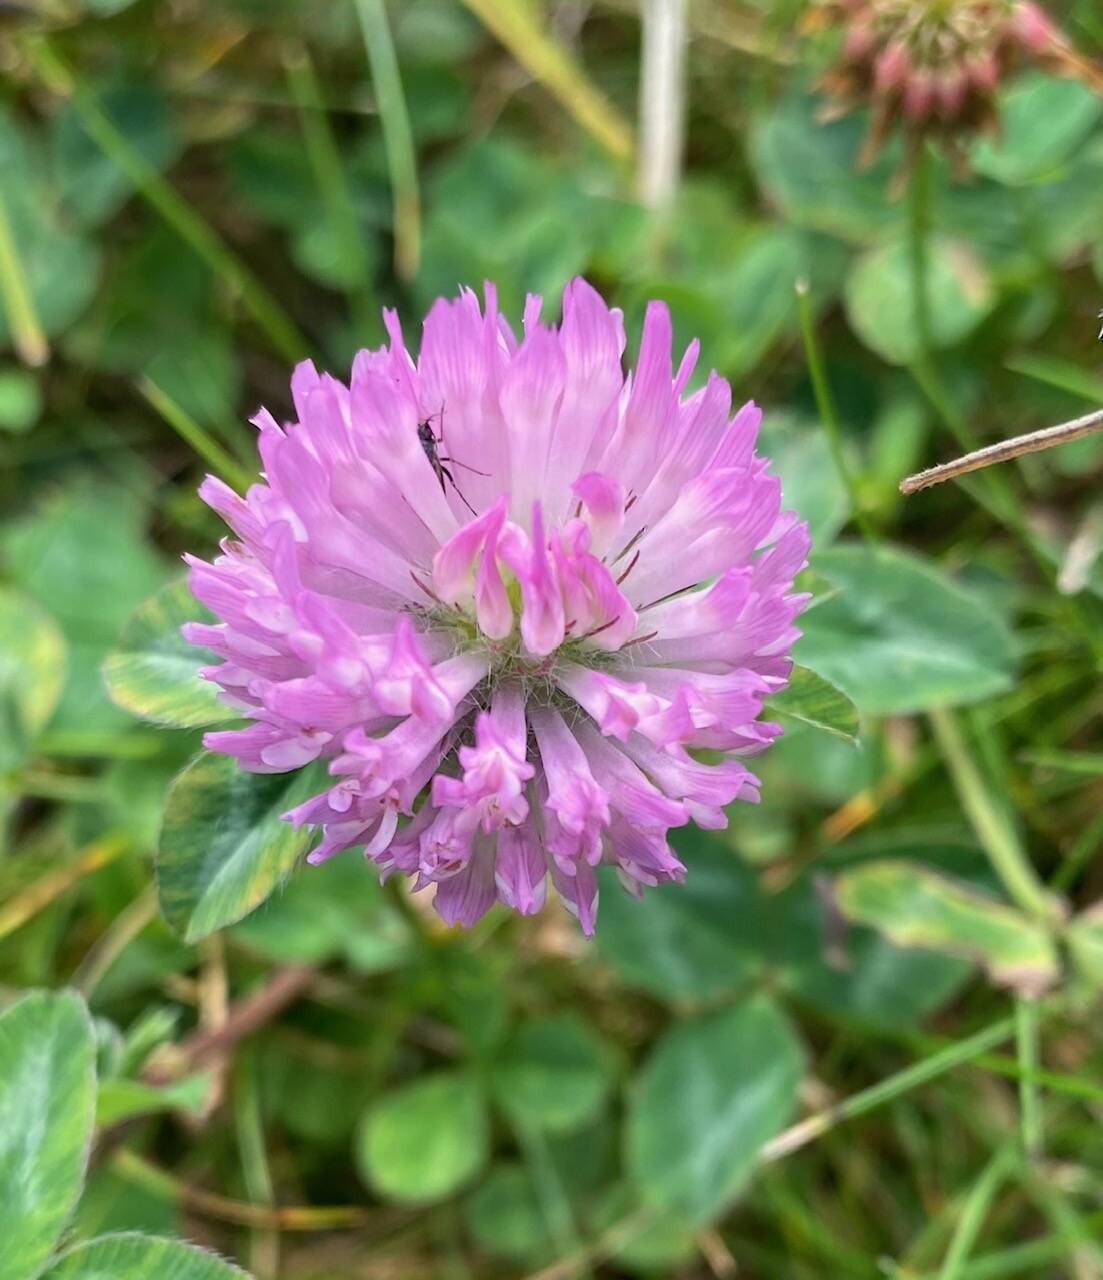 Clover, one of Juneau’s few remaining blooming wildflowers later during the summer, on Aug. 5 in Cowee Meadows. (Photo by Denise Carroll)